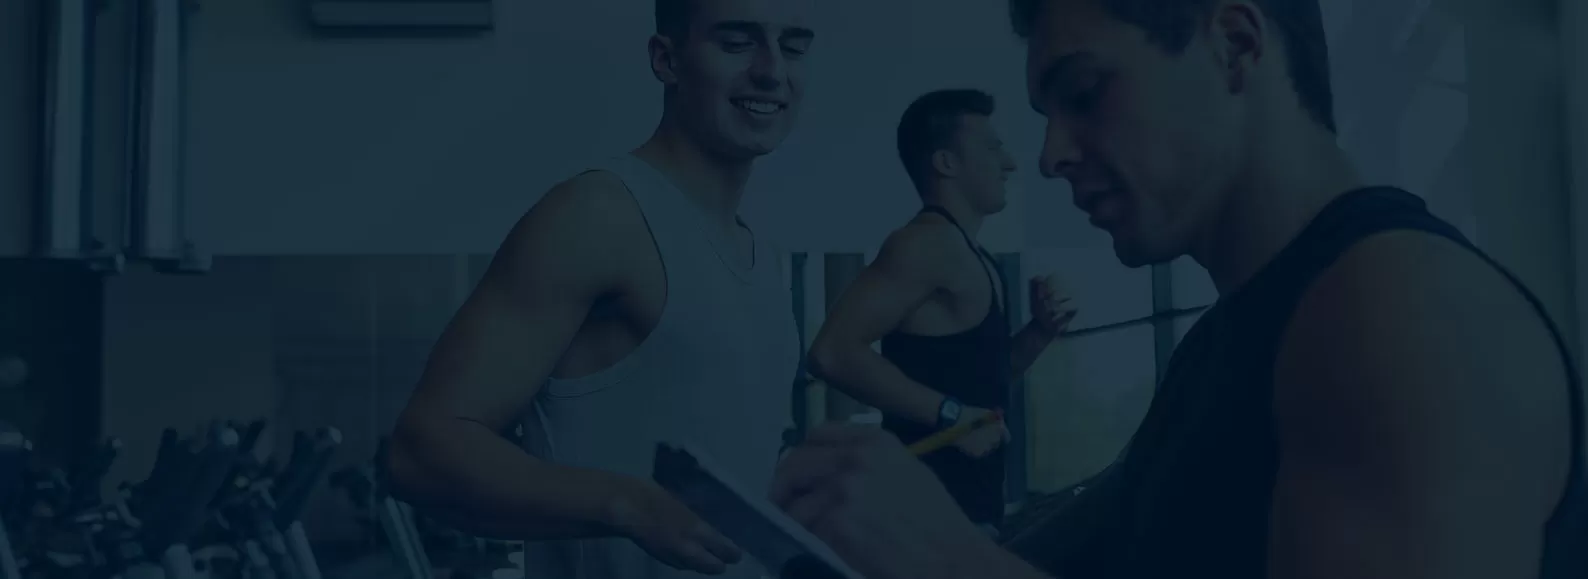 man running on treadmill as personal trainer assists and takes notes